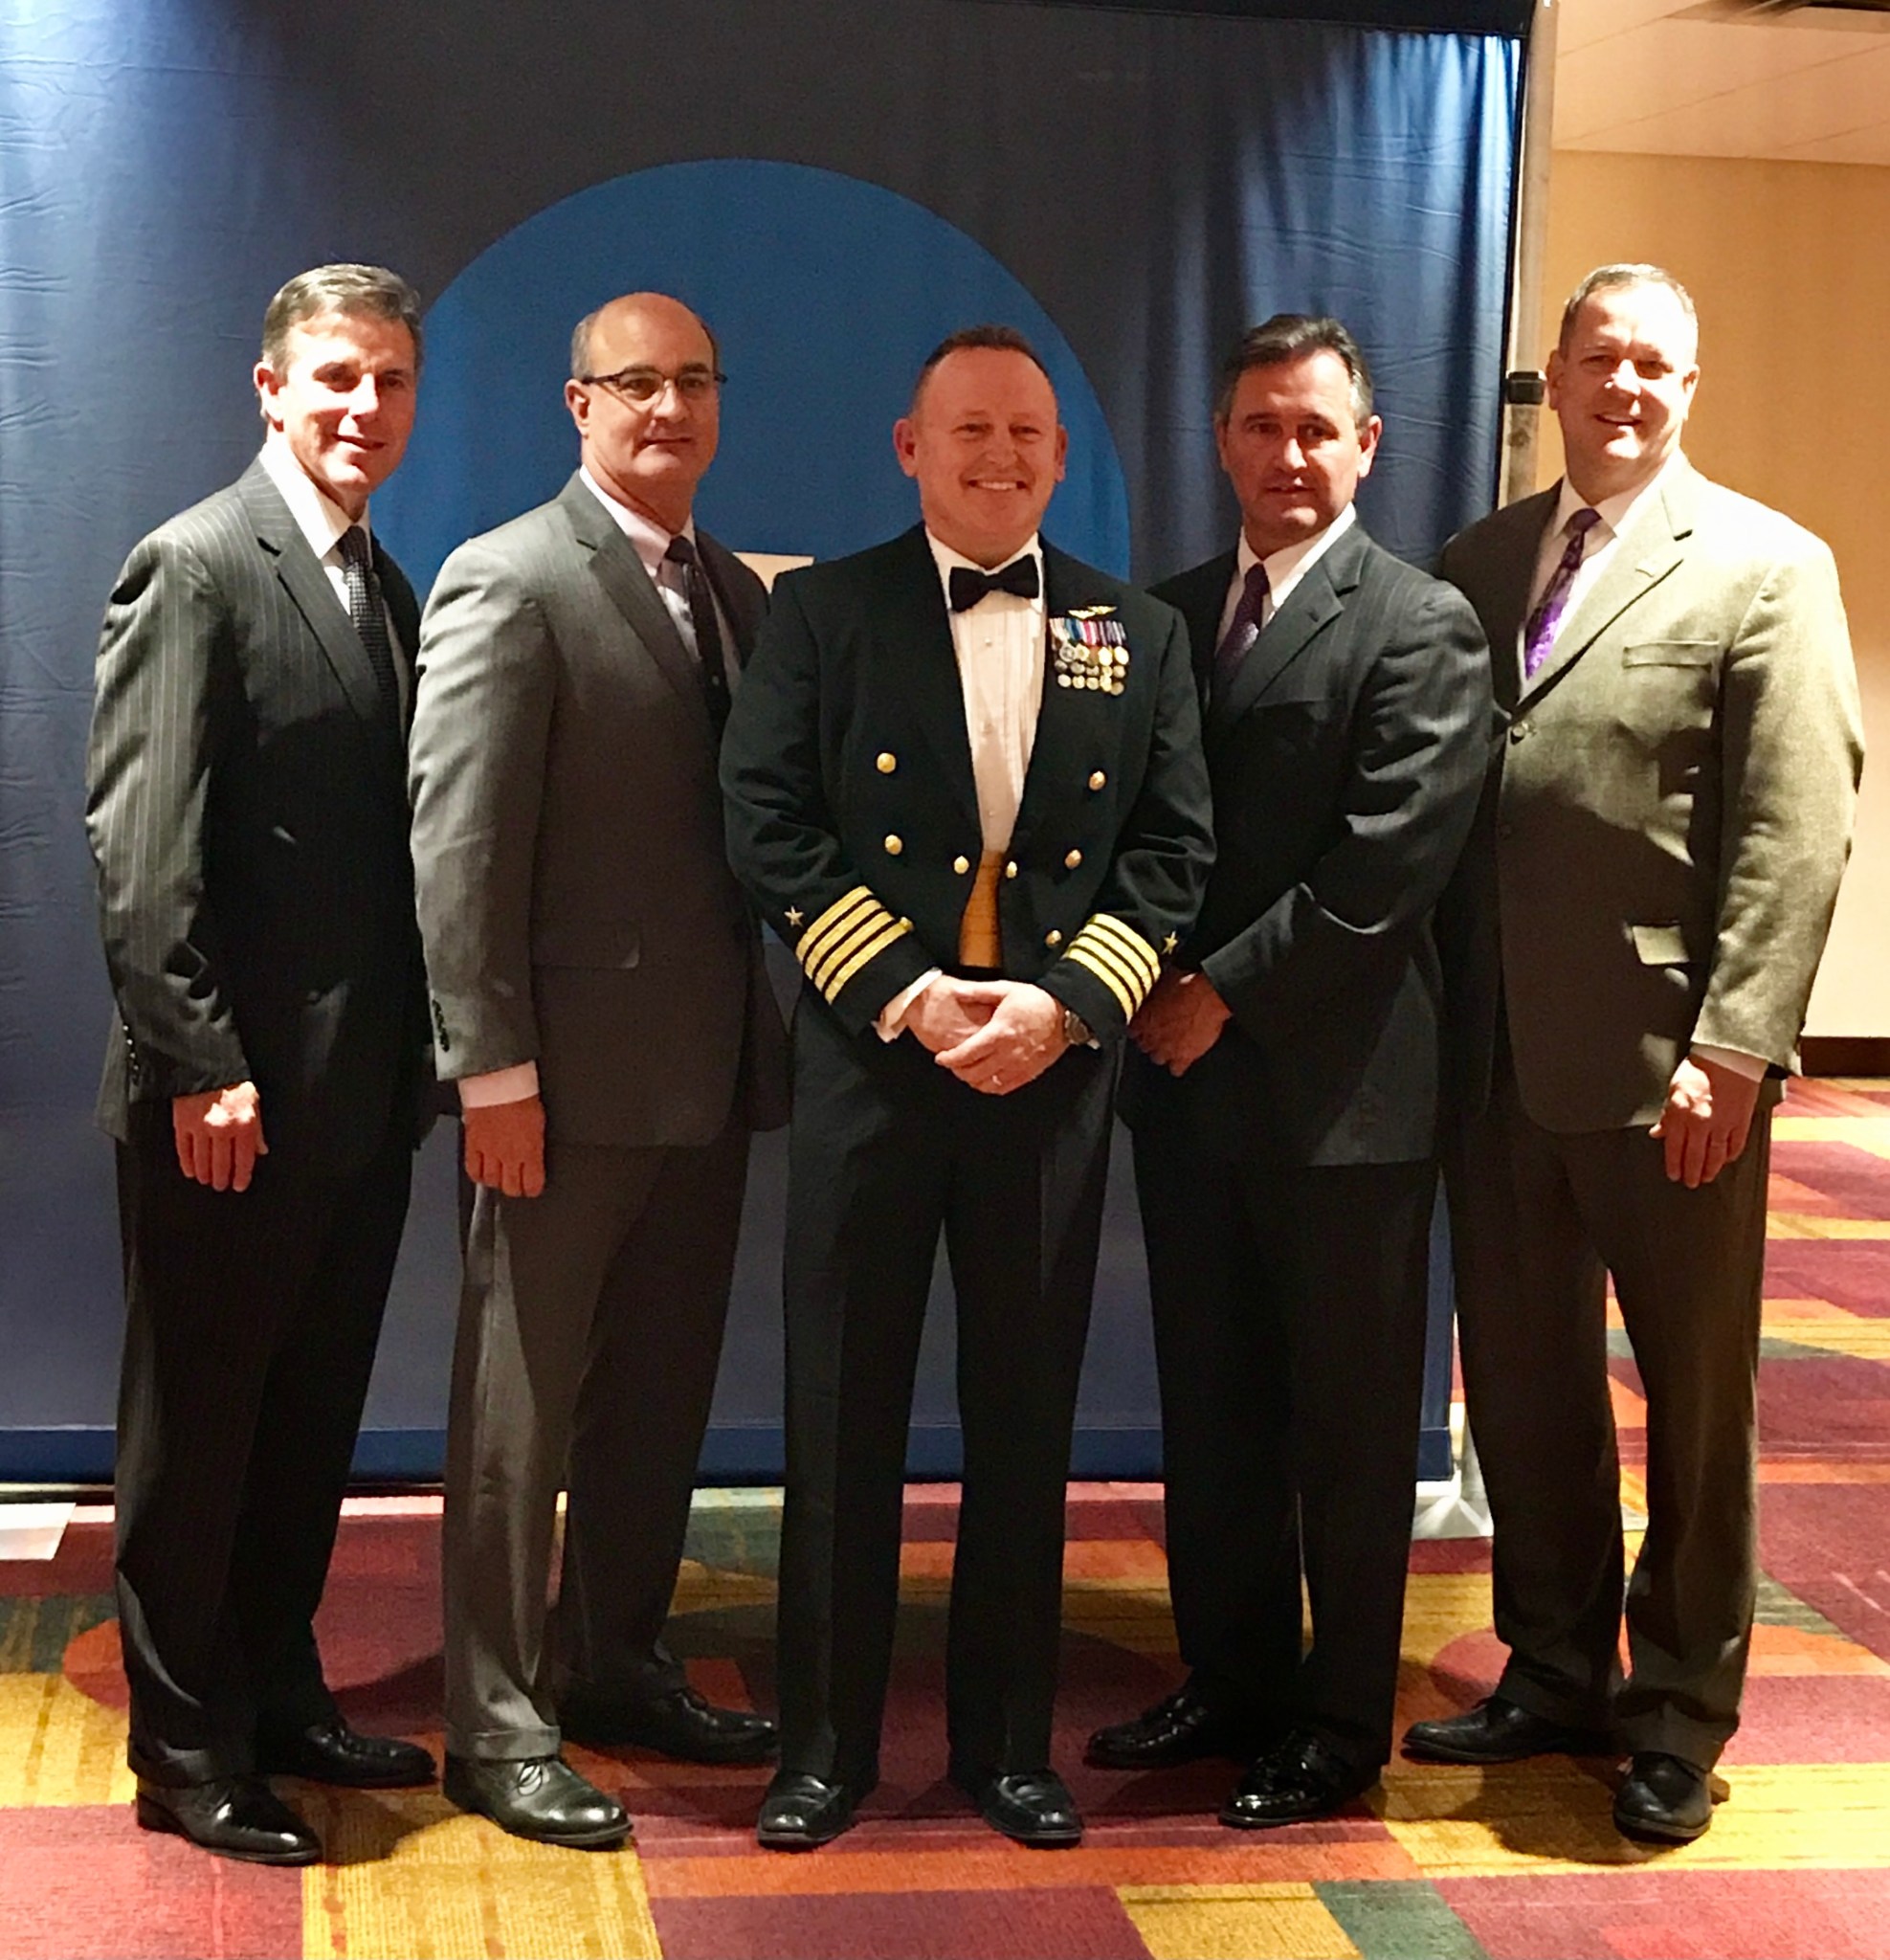 Billy Stover and Butch Wilmore pose during Second from left, Billy Stover poses next to Butch Wilmore, middle, during Theodore Roosevelt award ceremony in January 2018